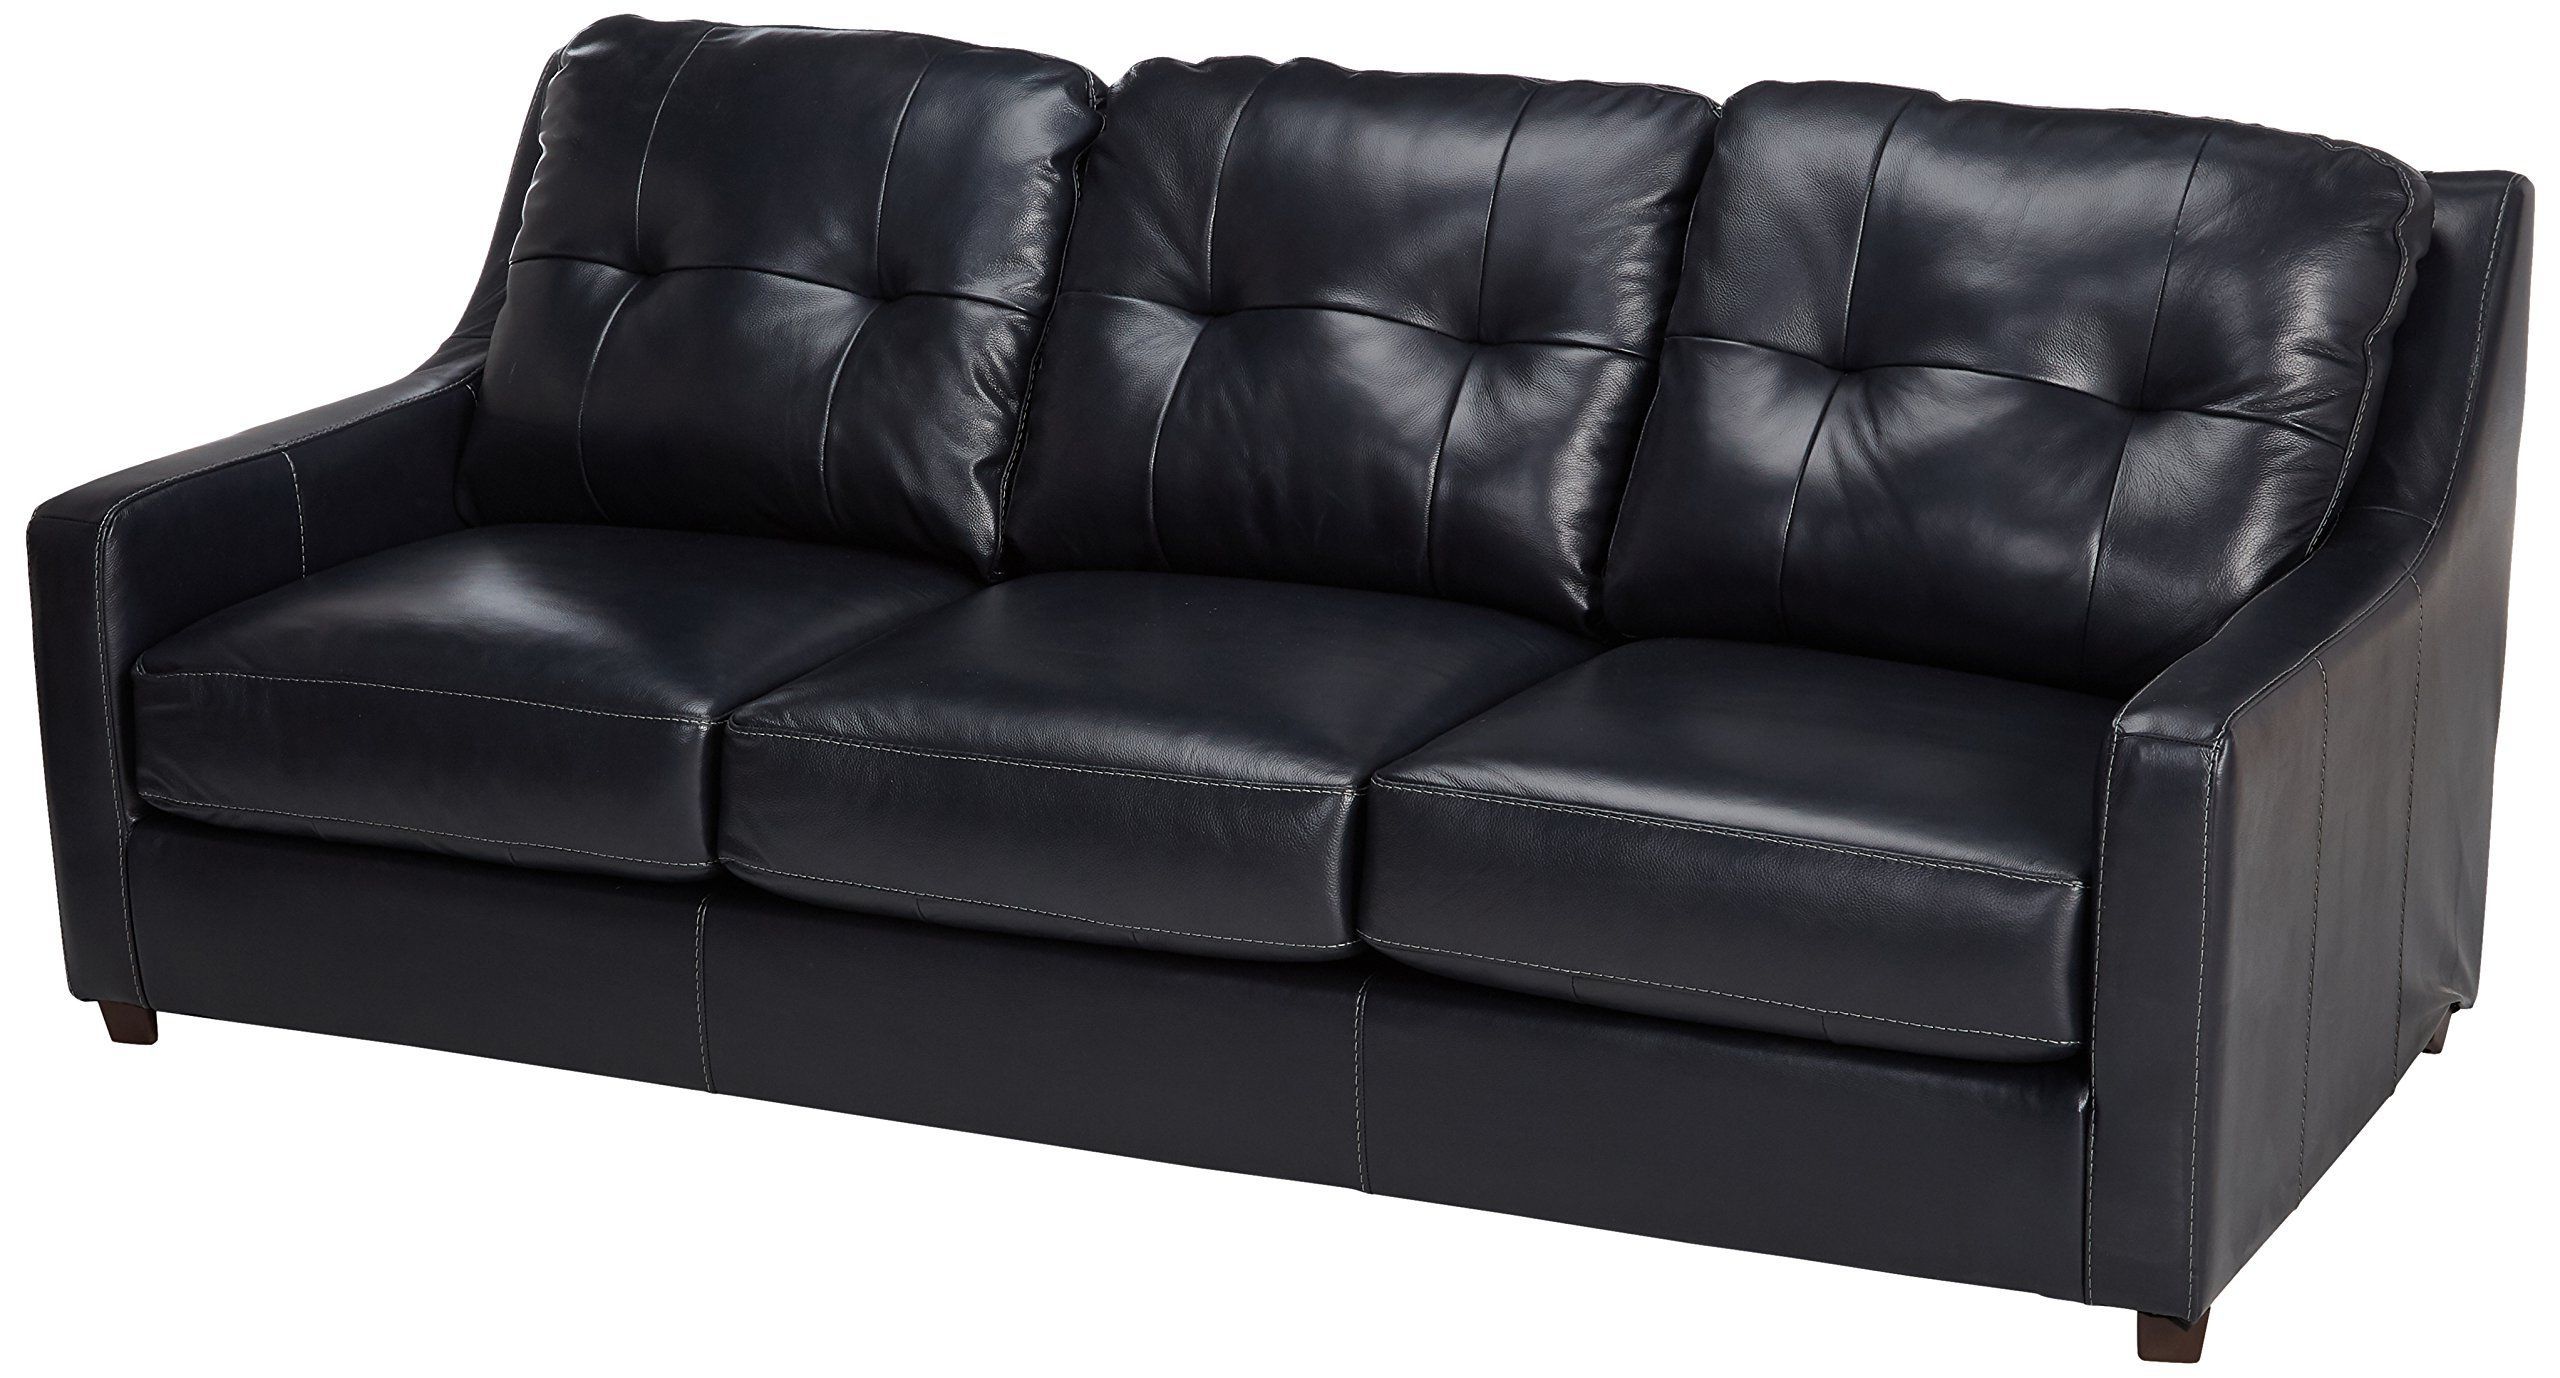 Ashley Furniture Signature Design Okean Upholstered Leather Queen Intended For Navy Sleeper Sofa Couches (View 5 of 20)